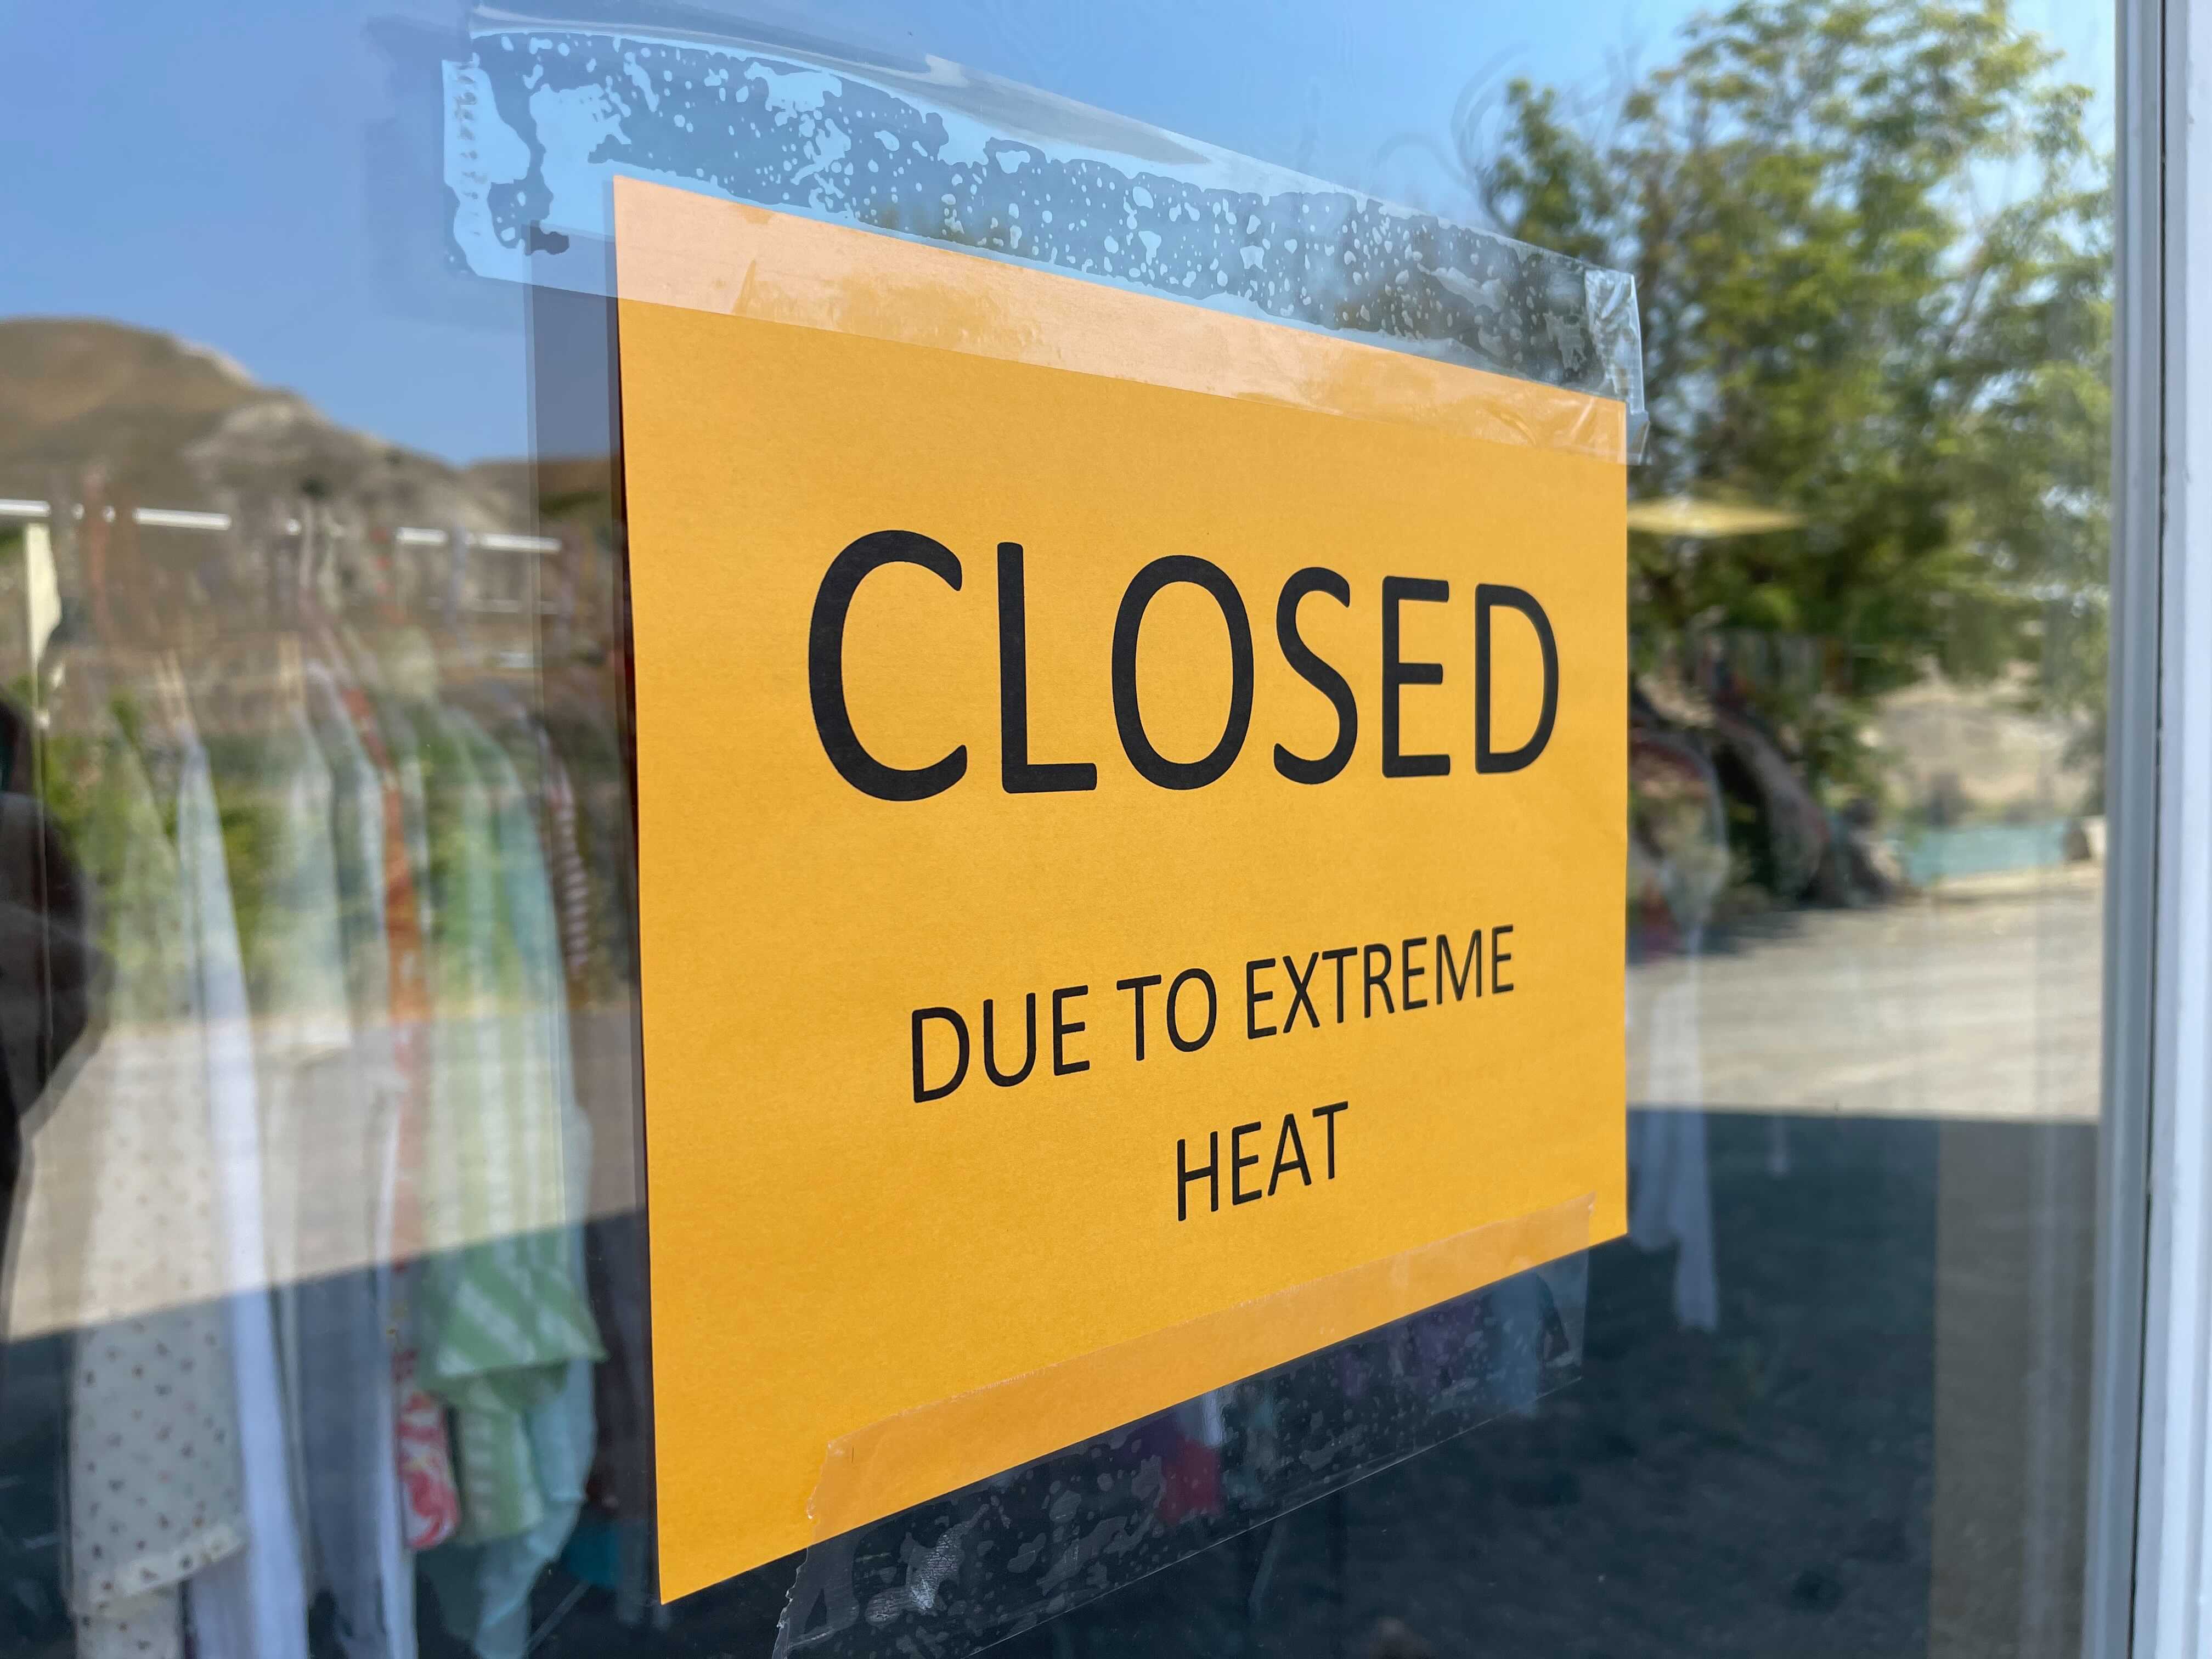 Sign on storefront in Ashcroft BC with text "Closed due to extreme heat"